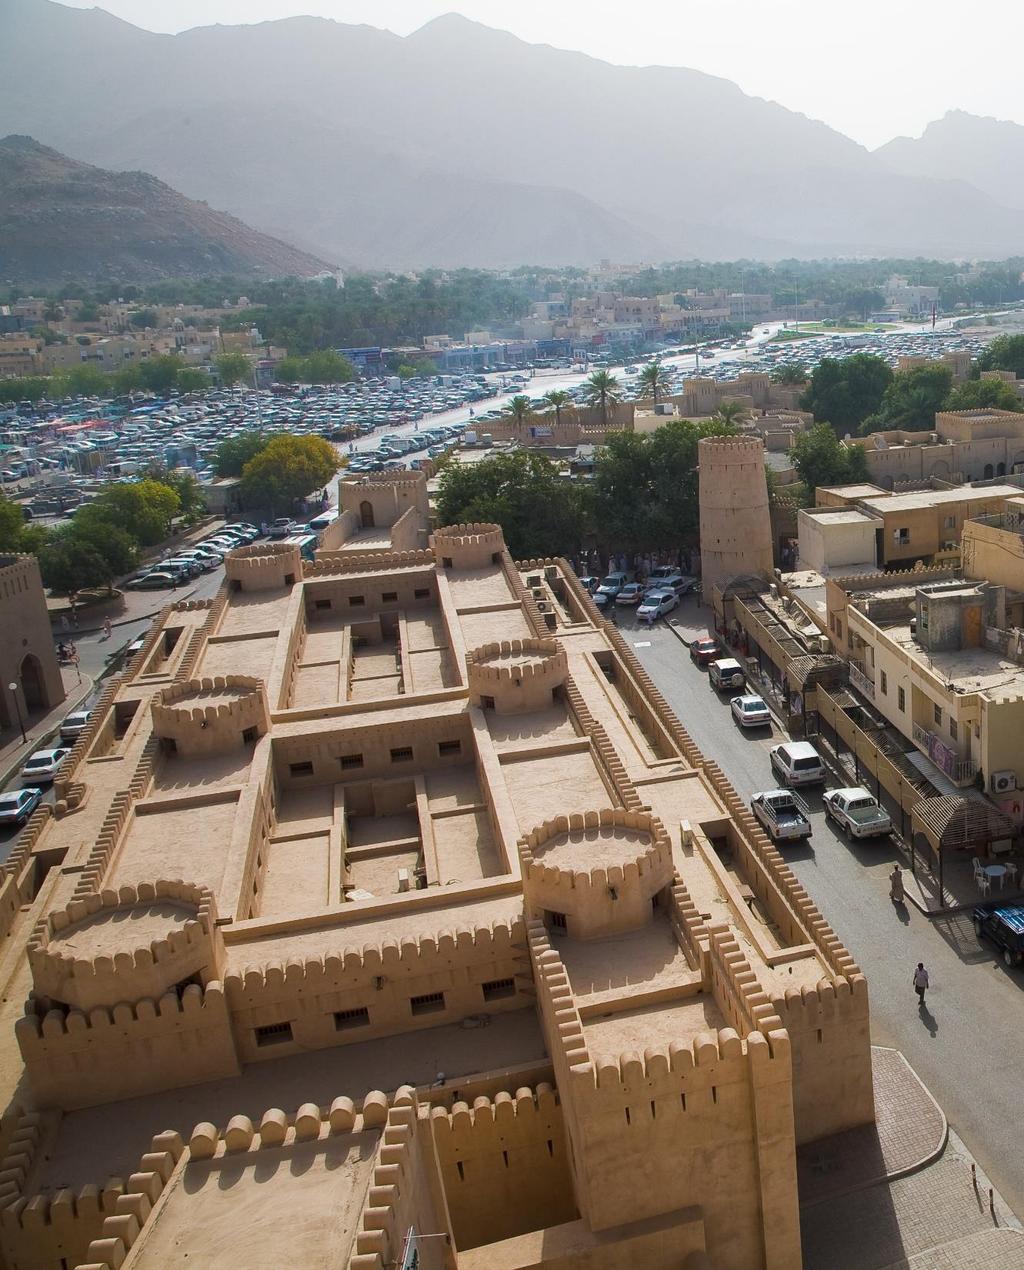 NIZWA: THE FORT AND SOUQ Rising from the lush greenery and dates palms fed by the longest falaj system in the country, Nizwa city is a great place to spend the morning.